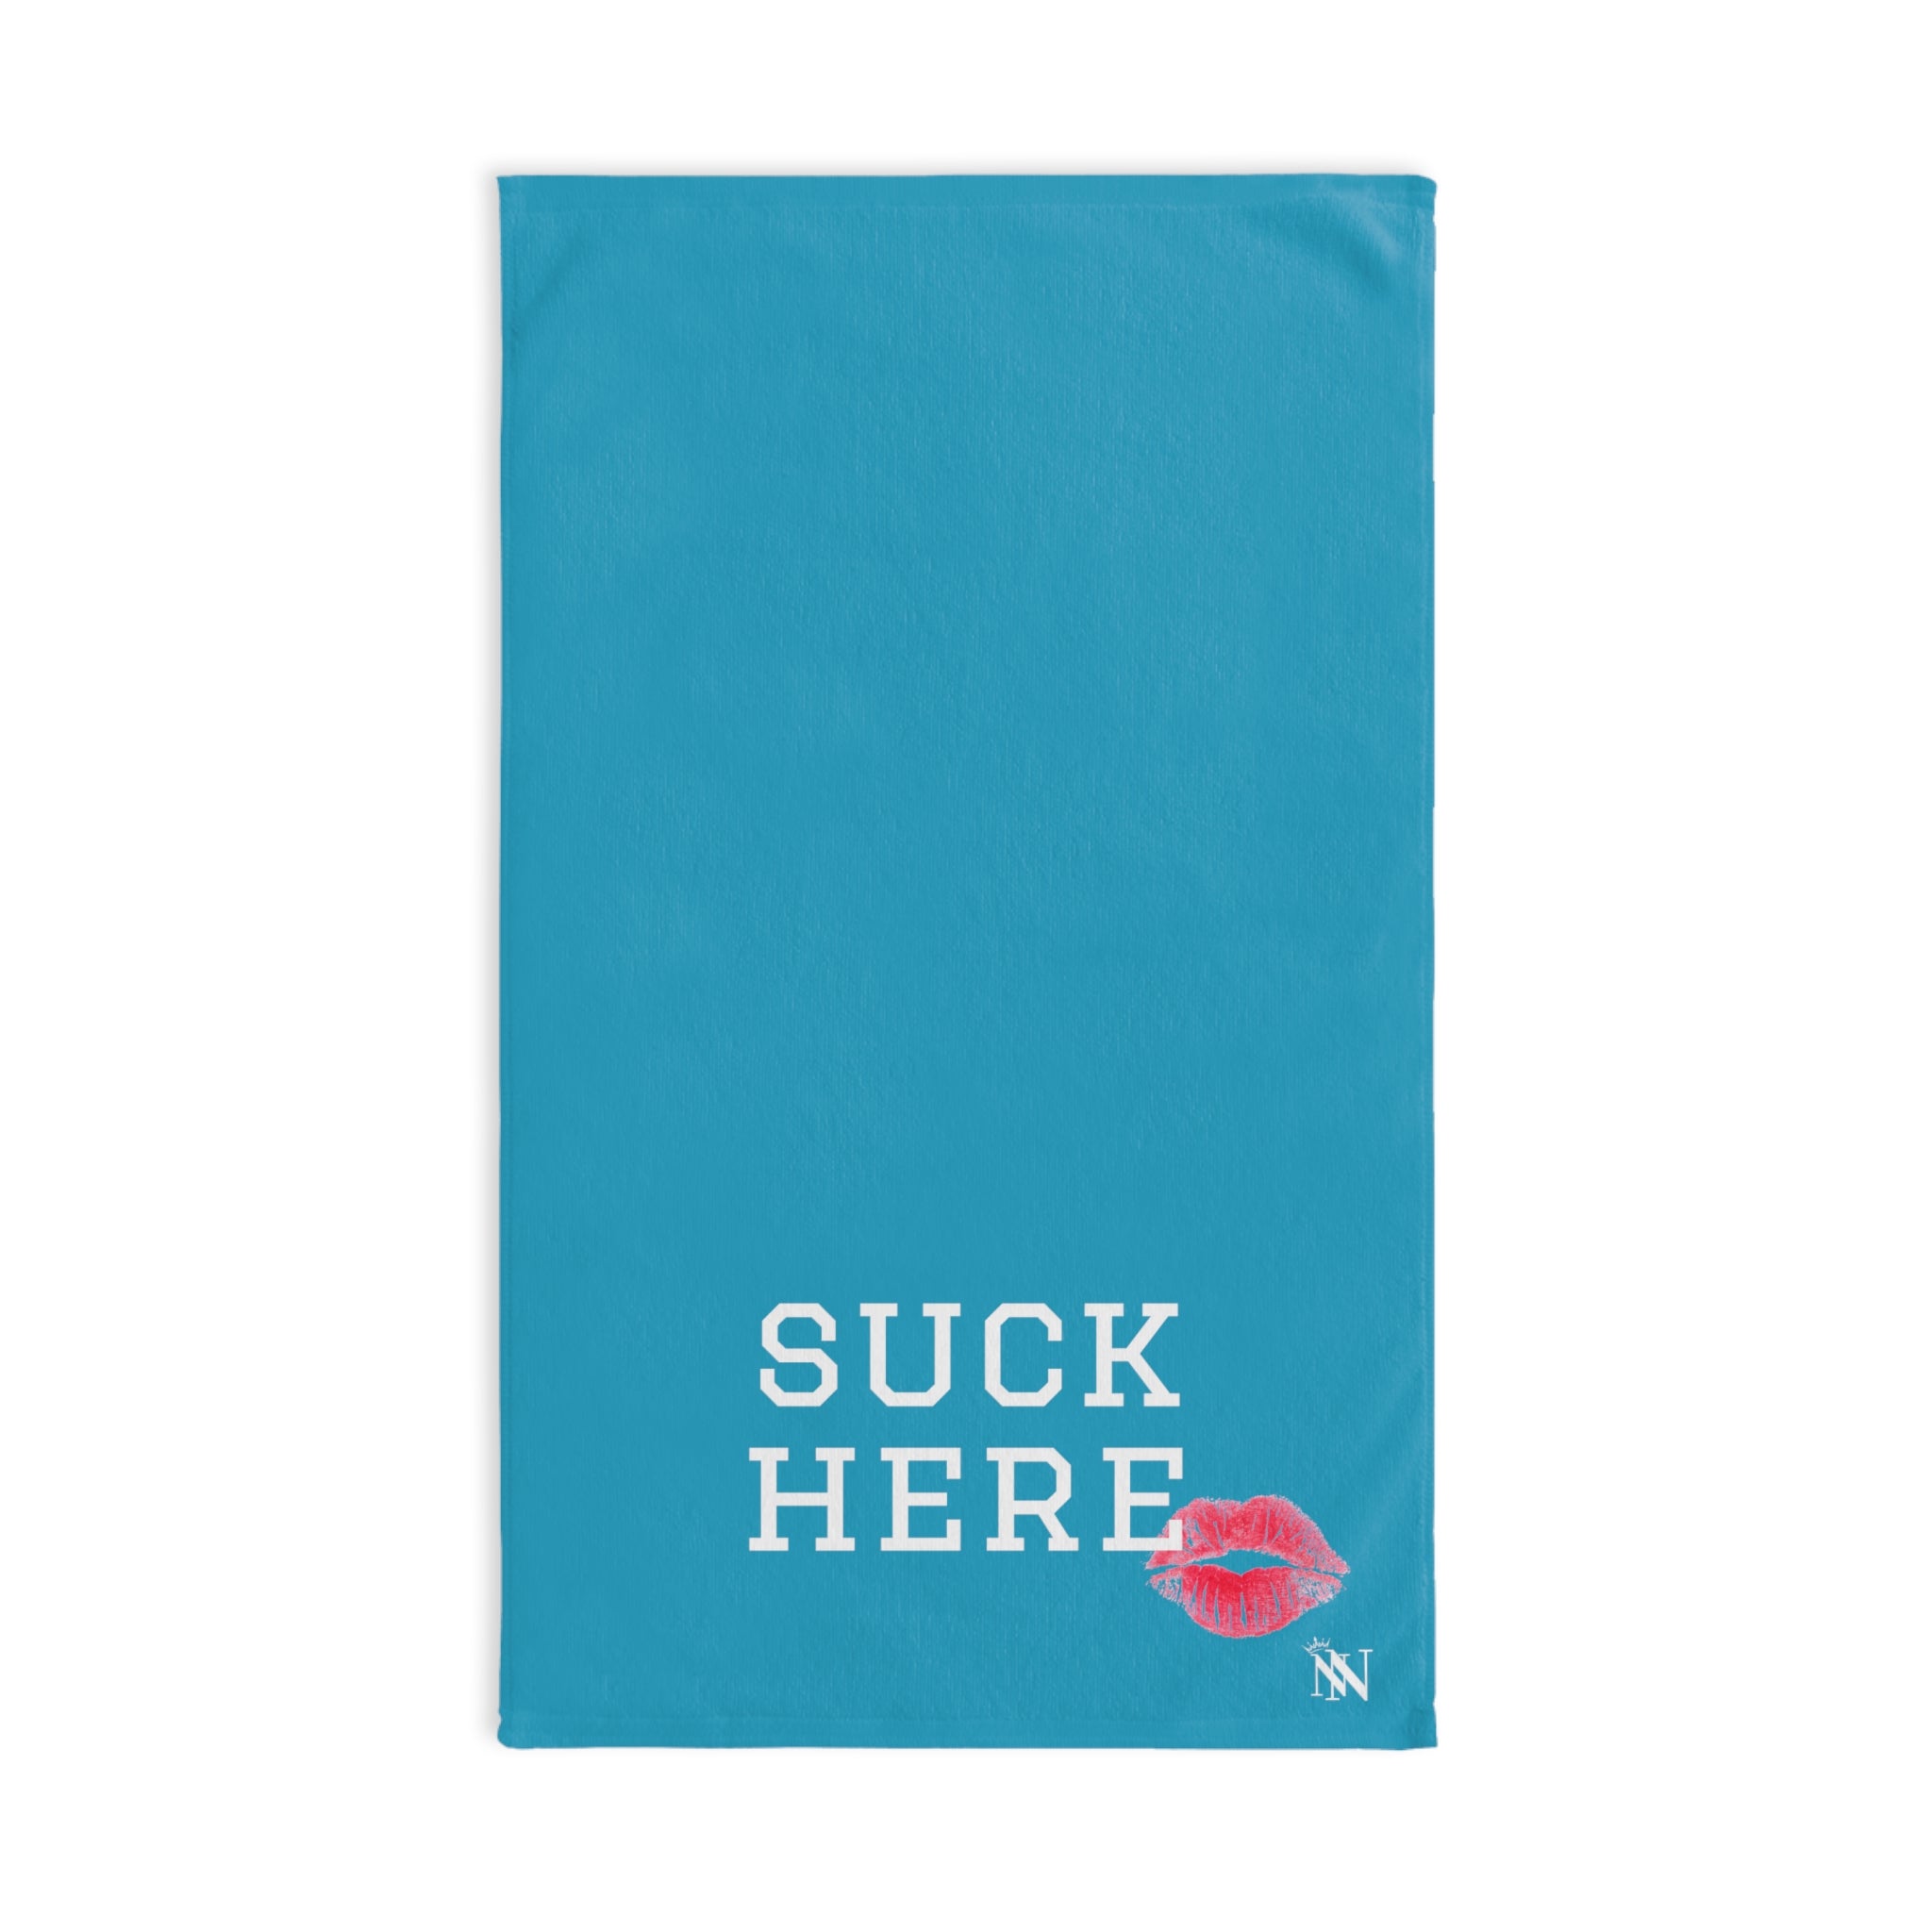 Suck Here Lips Kiss Teal | Novelty Gifts for Boyfriend, Funny Towel Romantic Gift for Wedding Couple Fiance First Year Anniversary Valentines, Party Gag Gifts, Joke Humor Cloth for Husband Men BF NECTAR NAPKINS